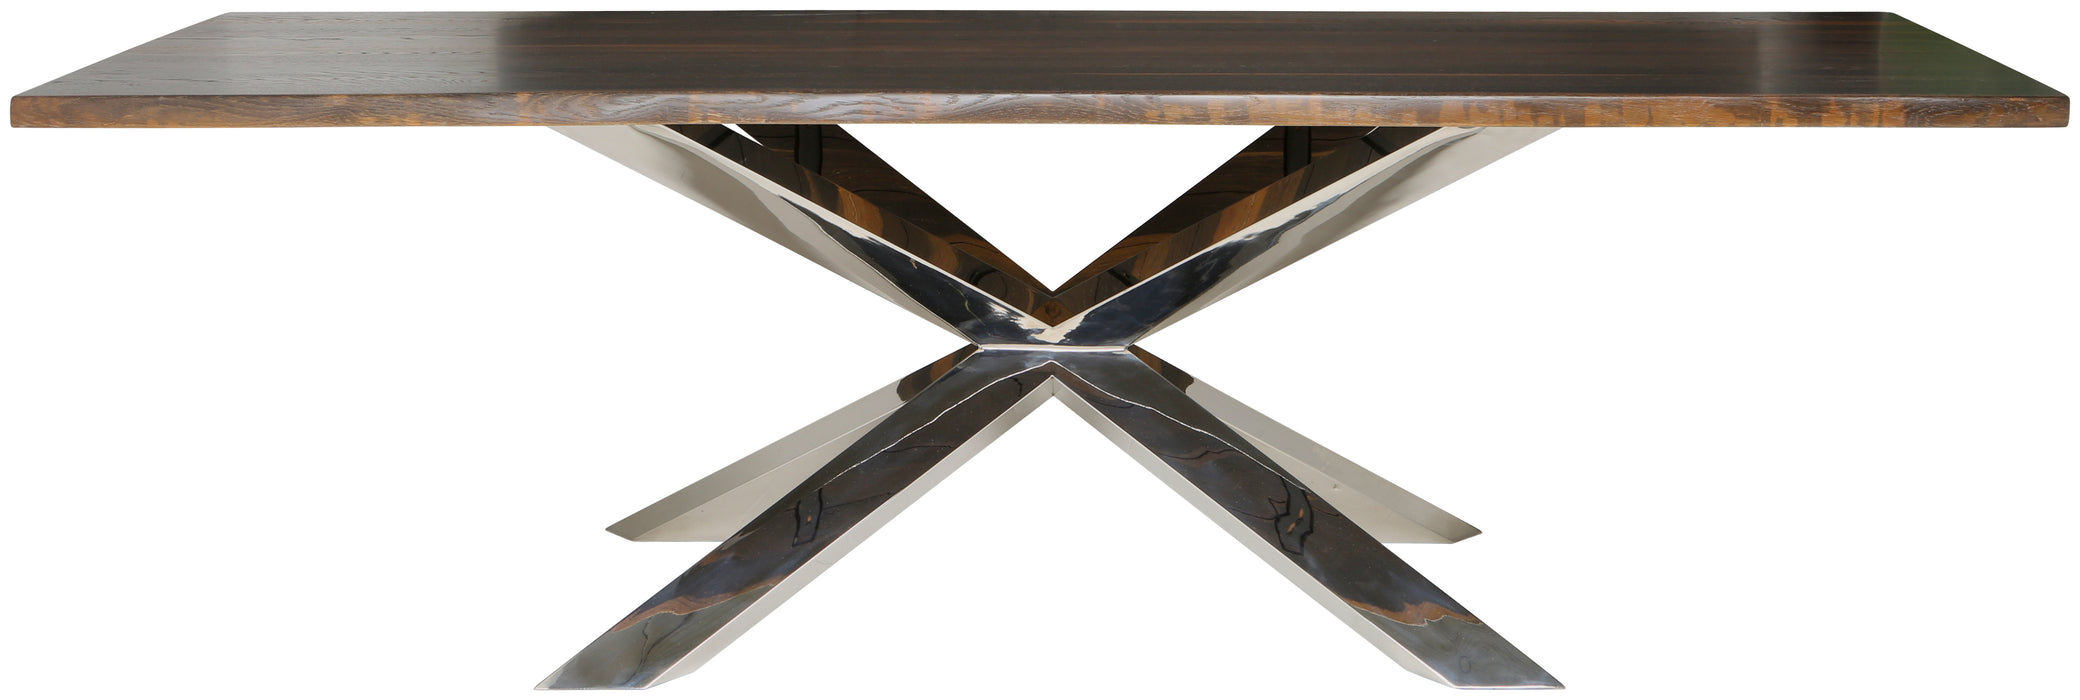 Couture NL Seared Dining Table